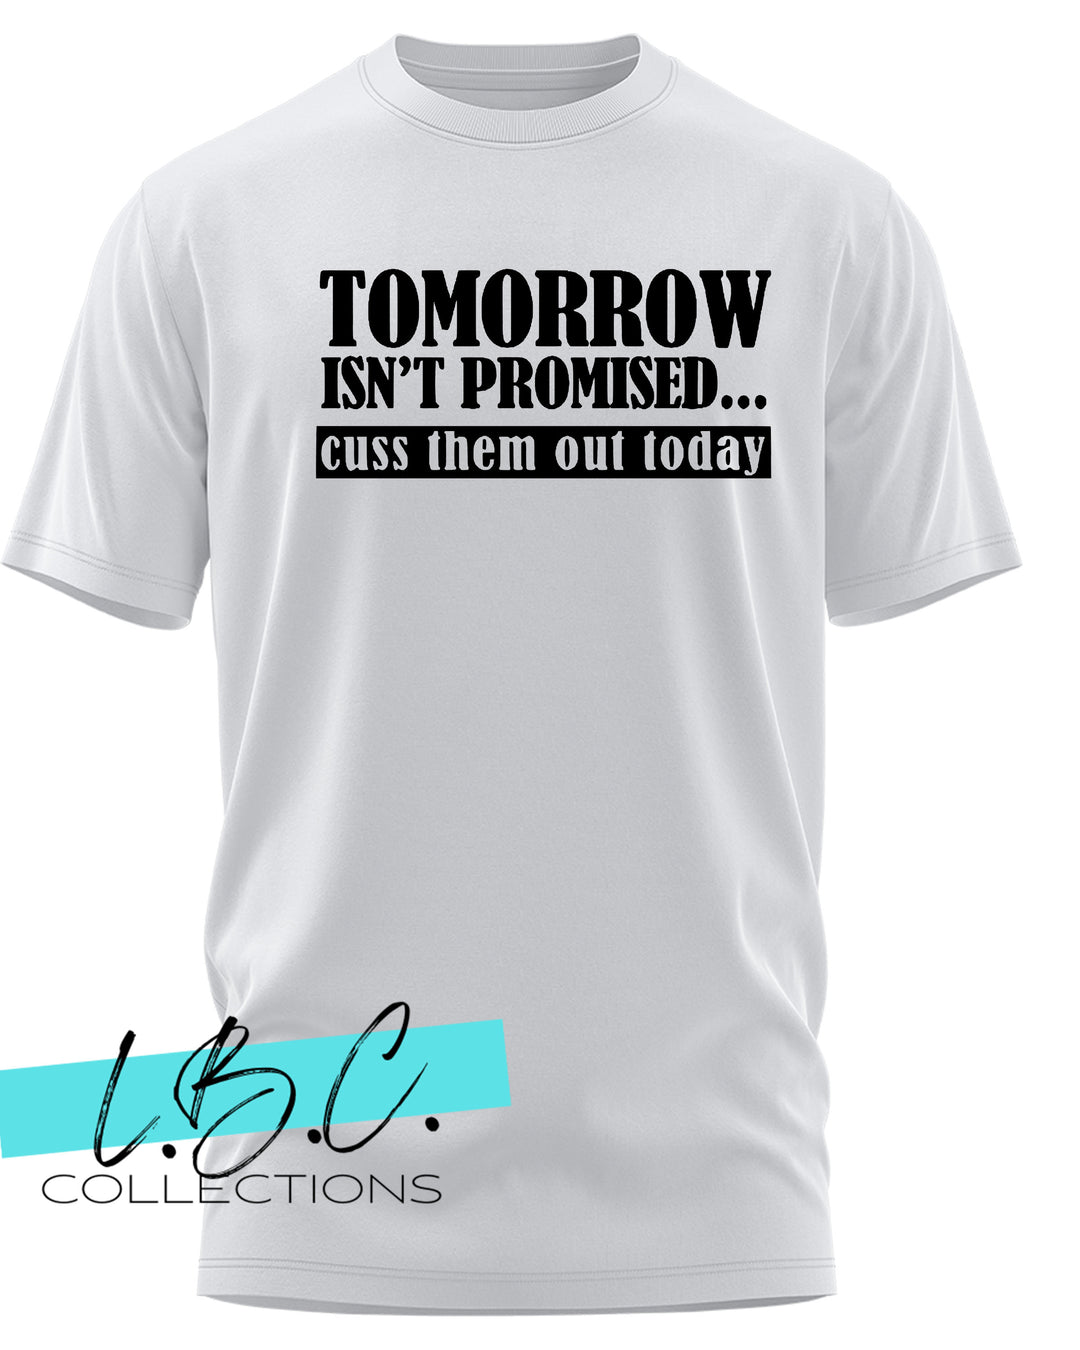 Tomorrow Isn't Promised graphic T-Shirt